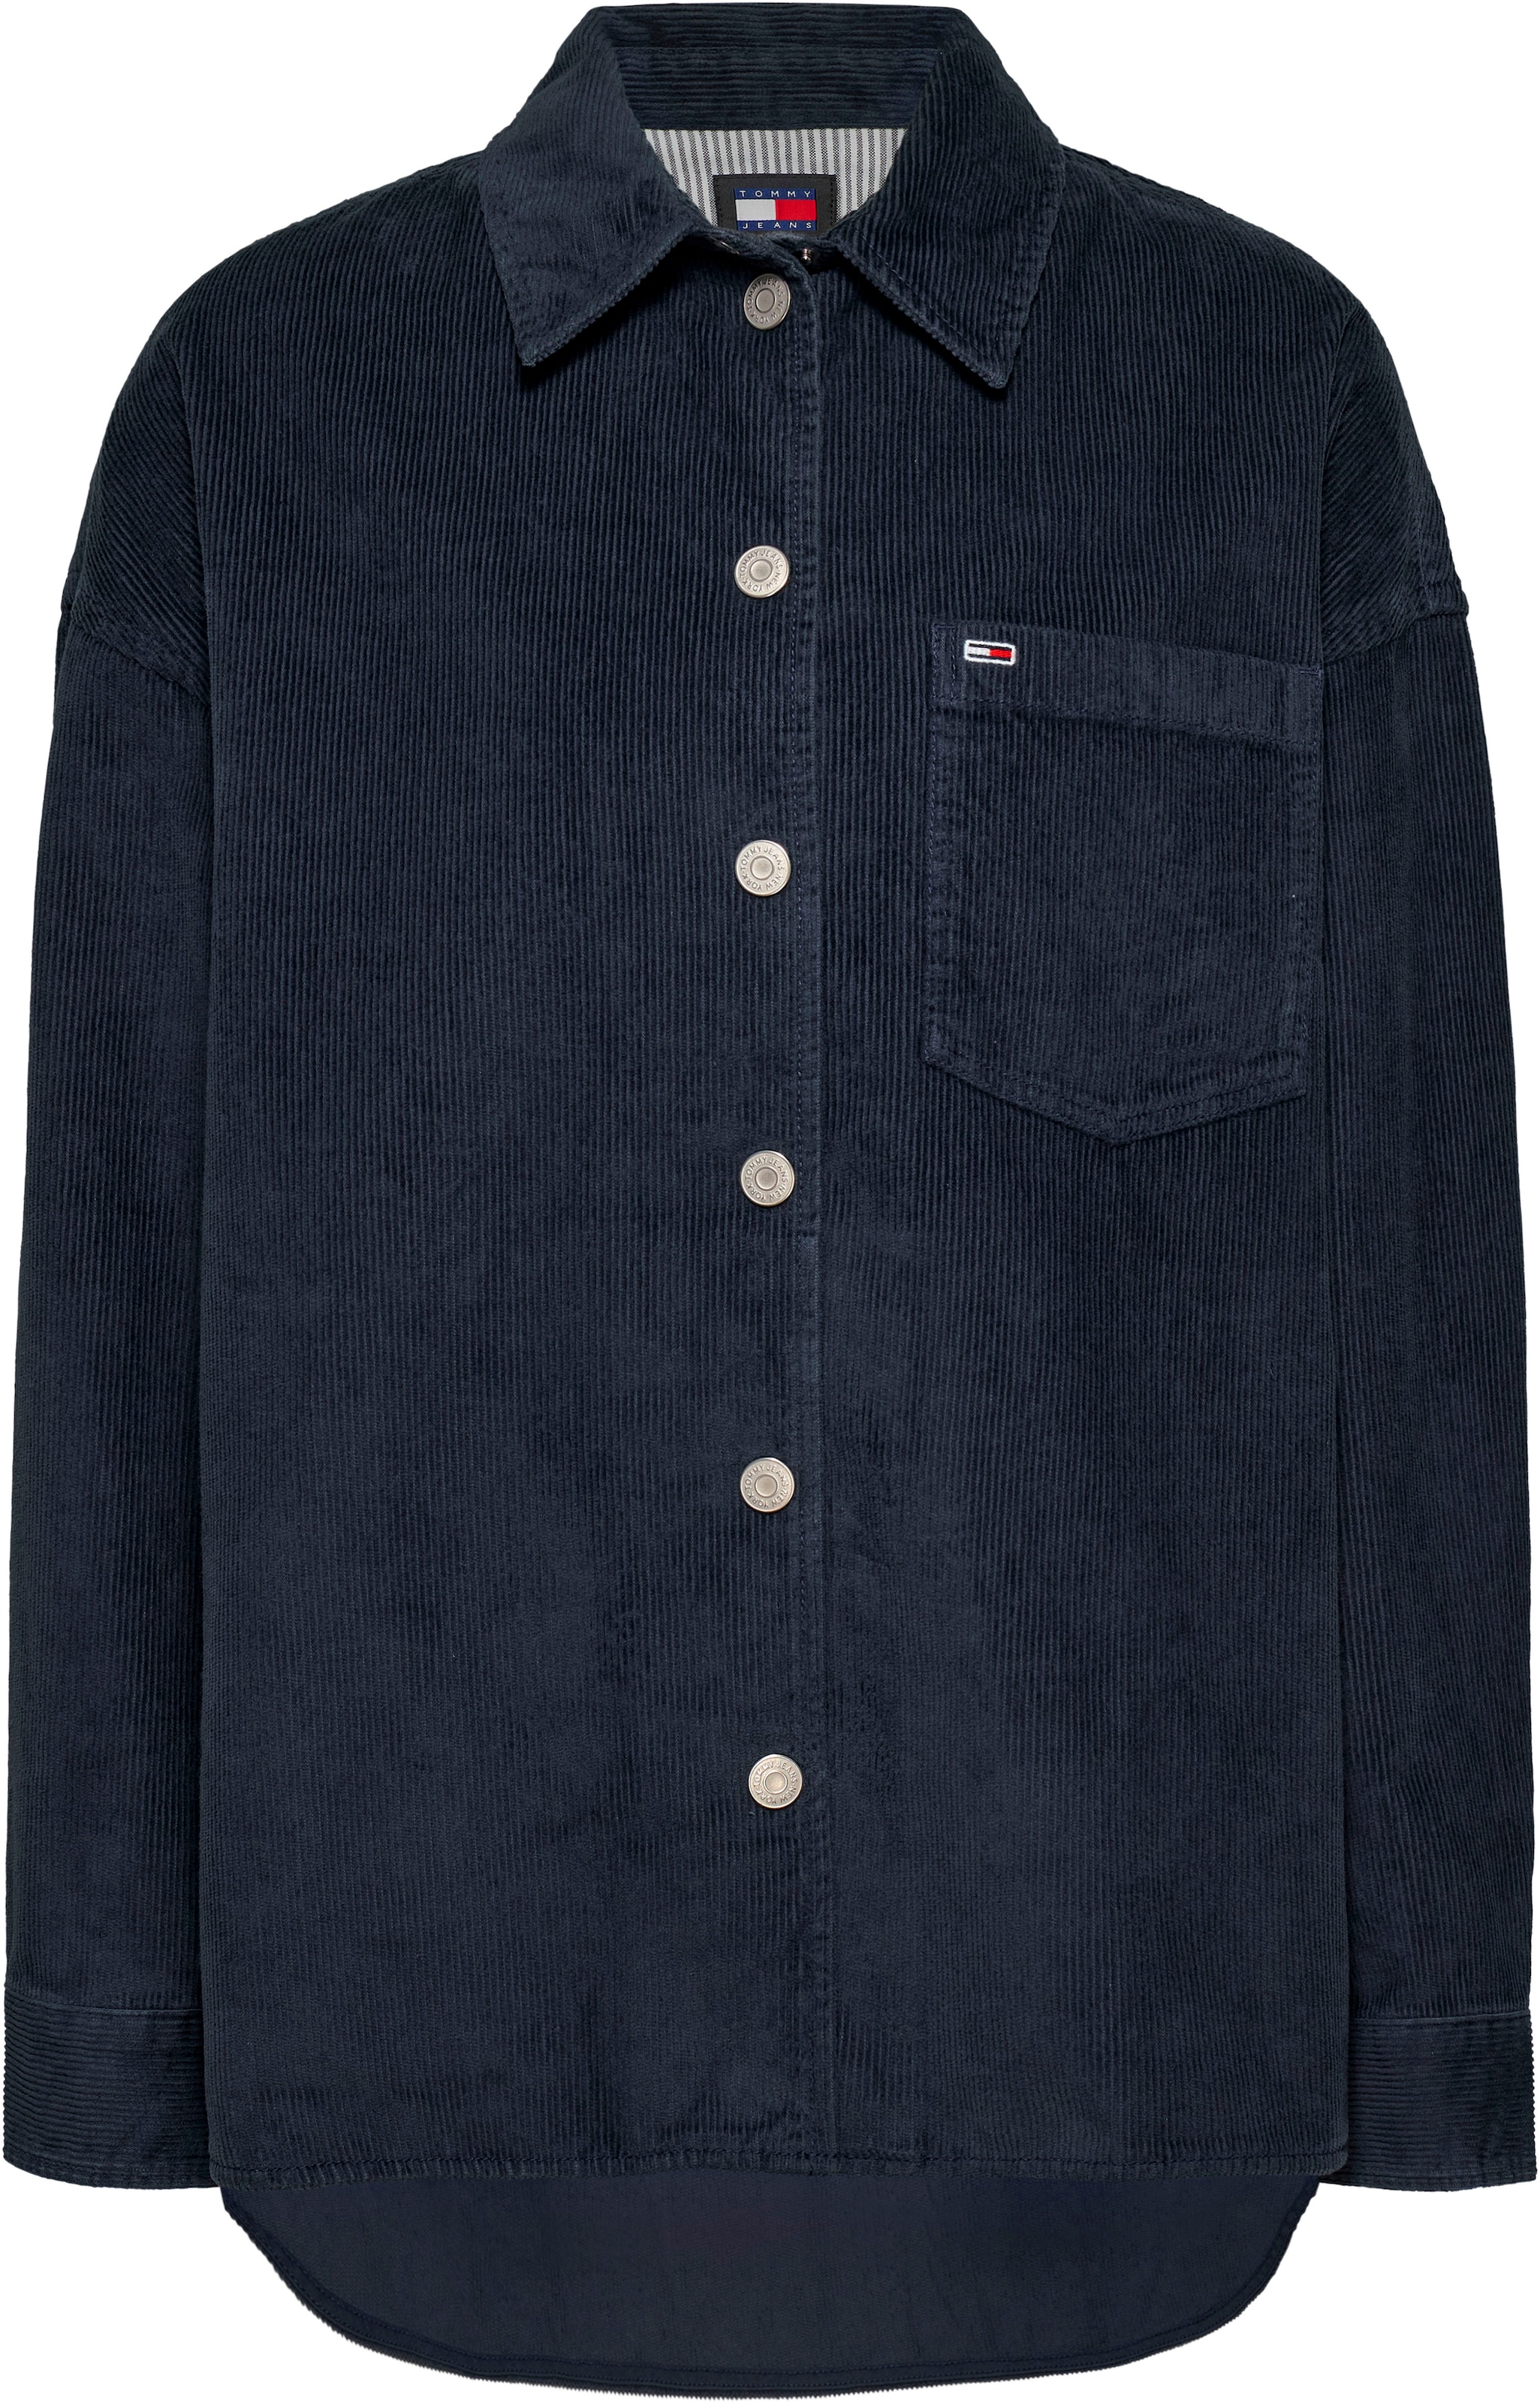 Tommy Jeans Hemdbluse »TJW WASHED CORD OVERSHIRT EXT«, aus Cord, modisches Overshirt